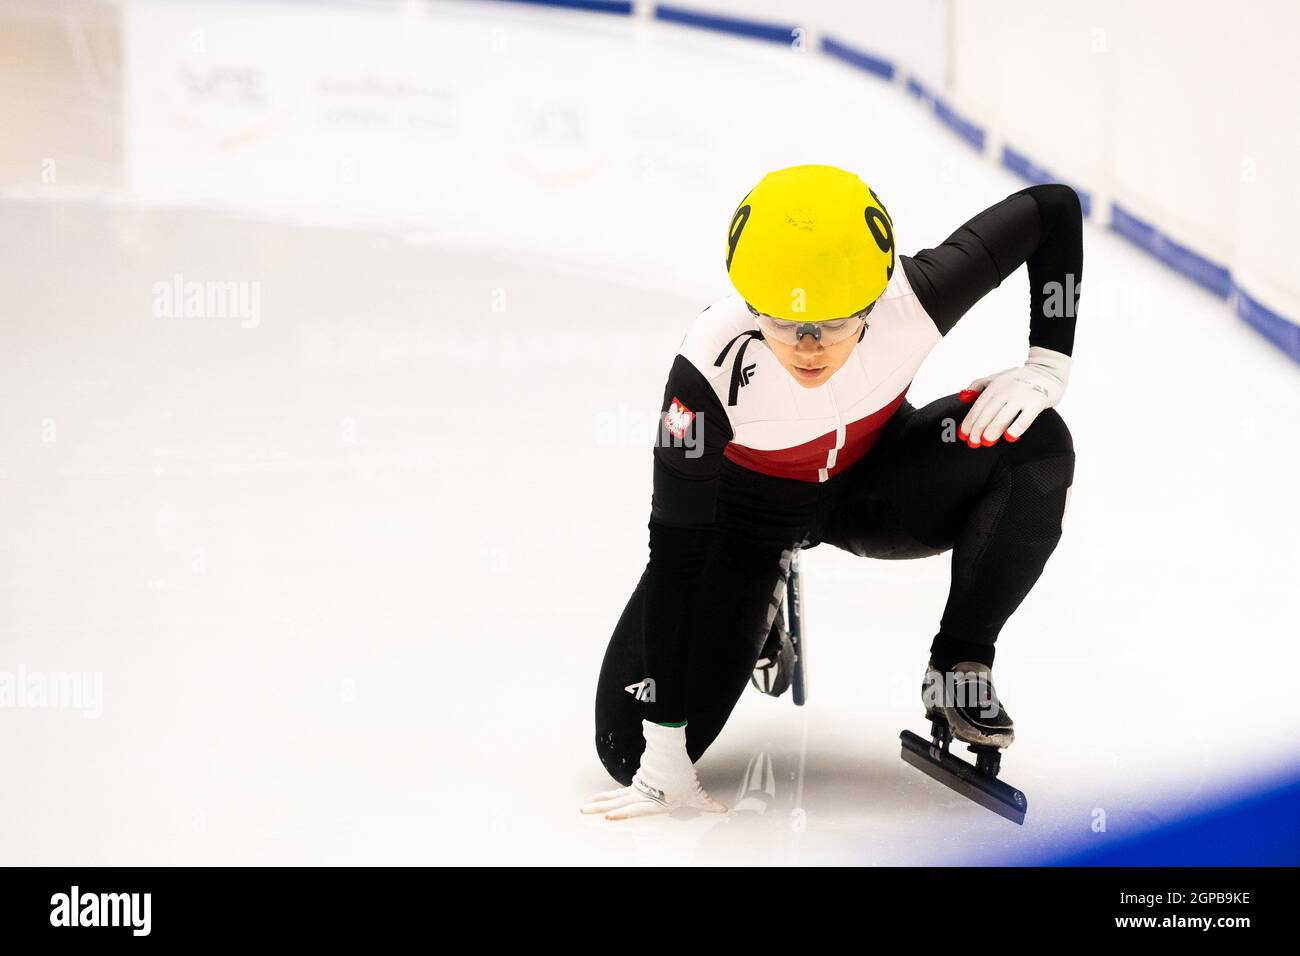 Nikola Mazur seen in action during the Short Track Speed Skating Polish  Ranking Cup 2021 at the Hala Olivia Stock Photo - Alamy